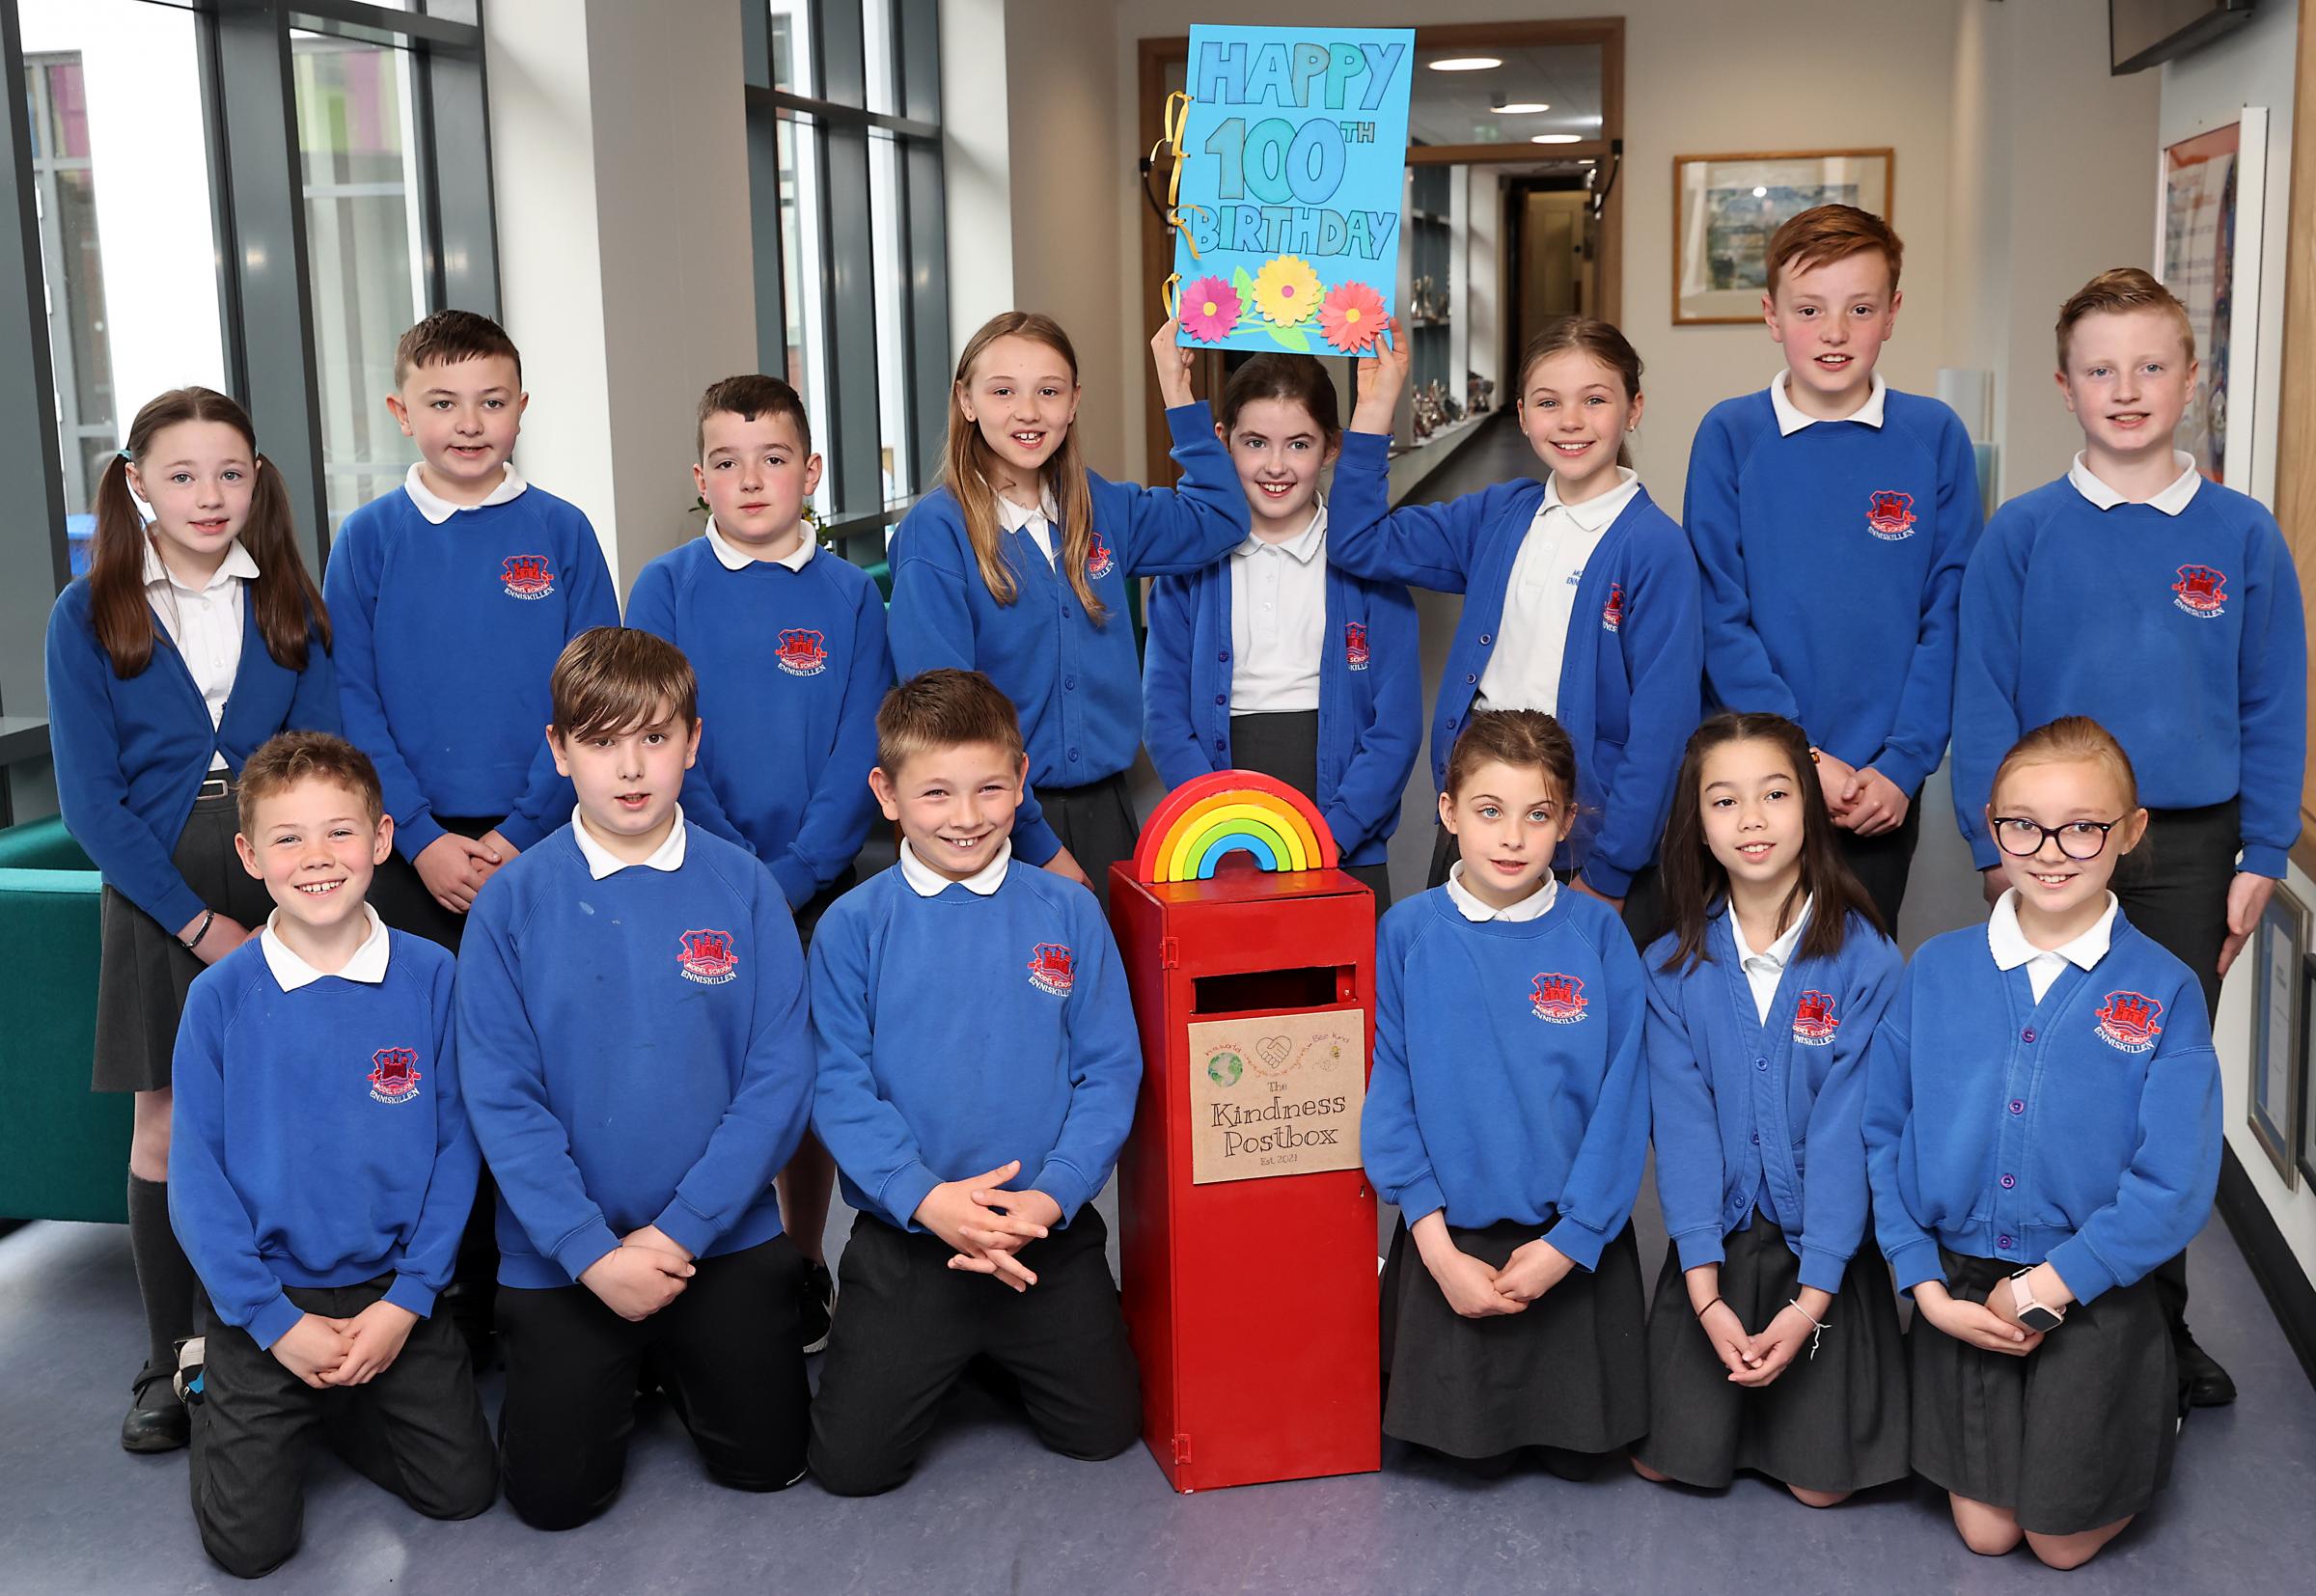 Kindness Post Box helps build relationships between Model School and County Care Home